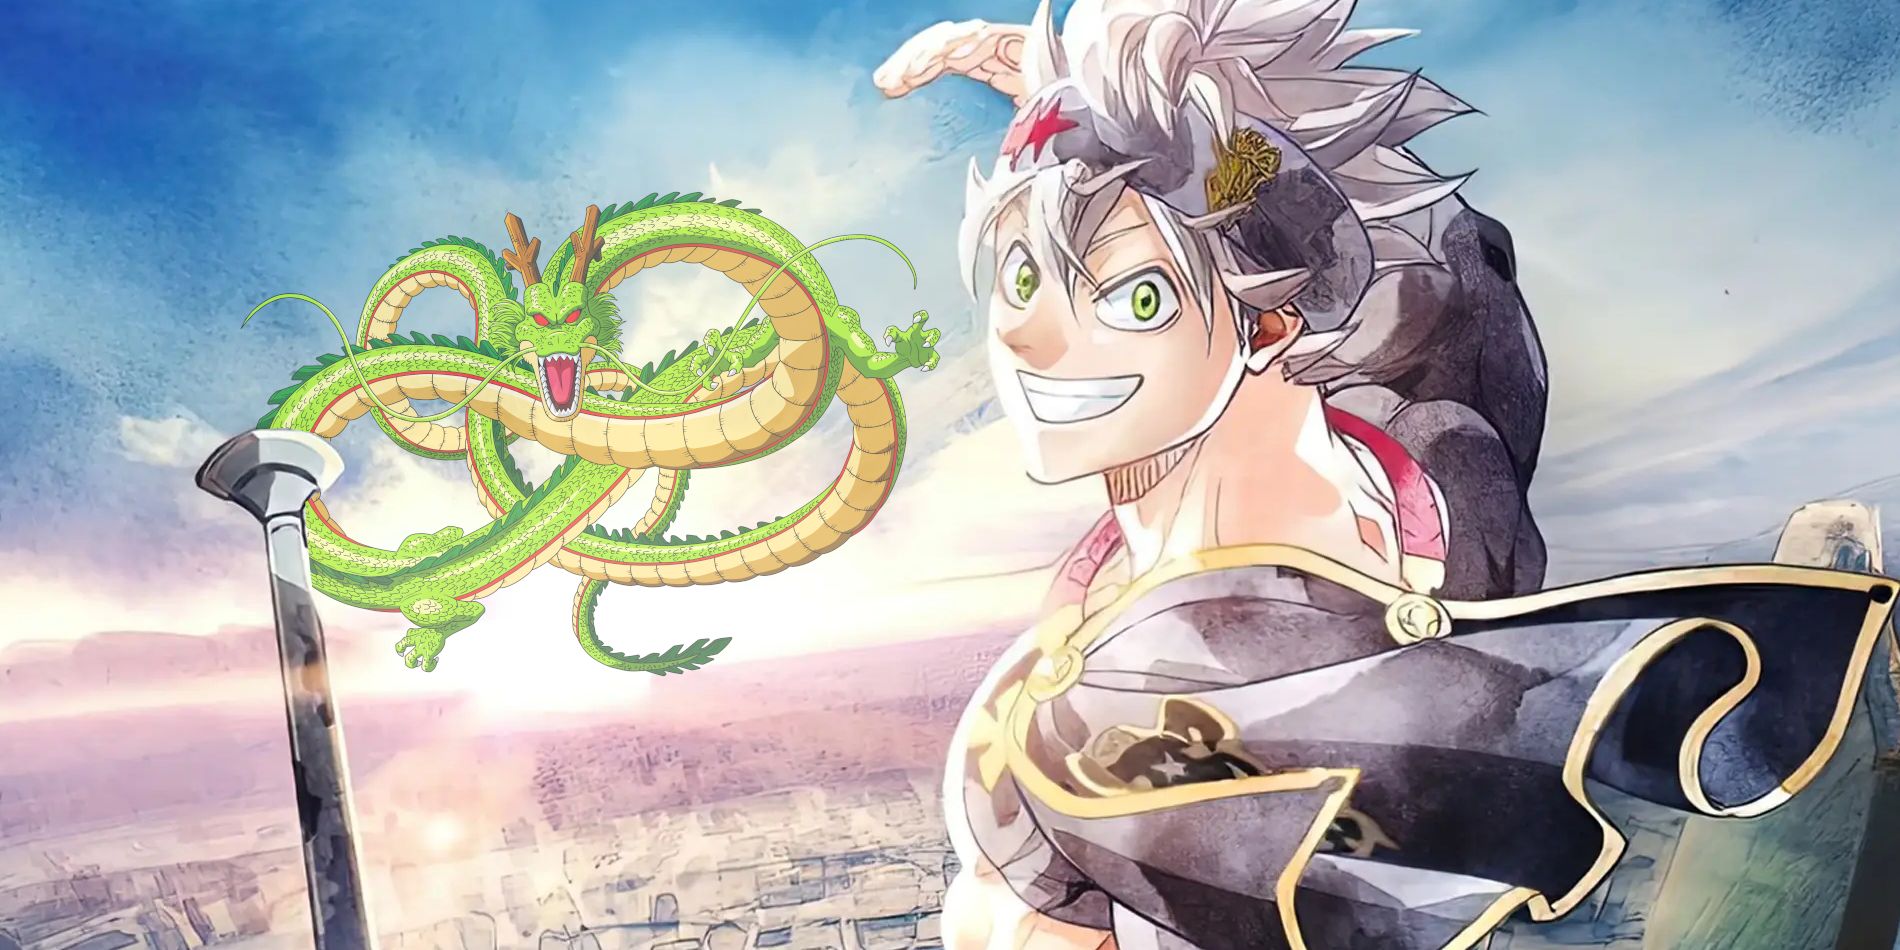 Image of Black Clover's Asta standing above a large city with the sun rising on the horizon with Dragon Ball's Shenron dragon flying in the distance.